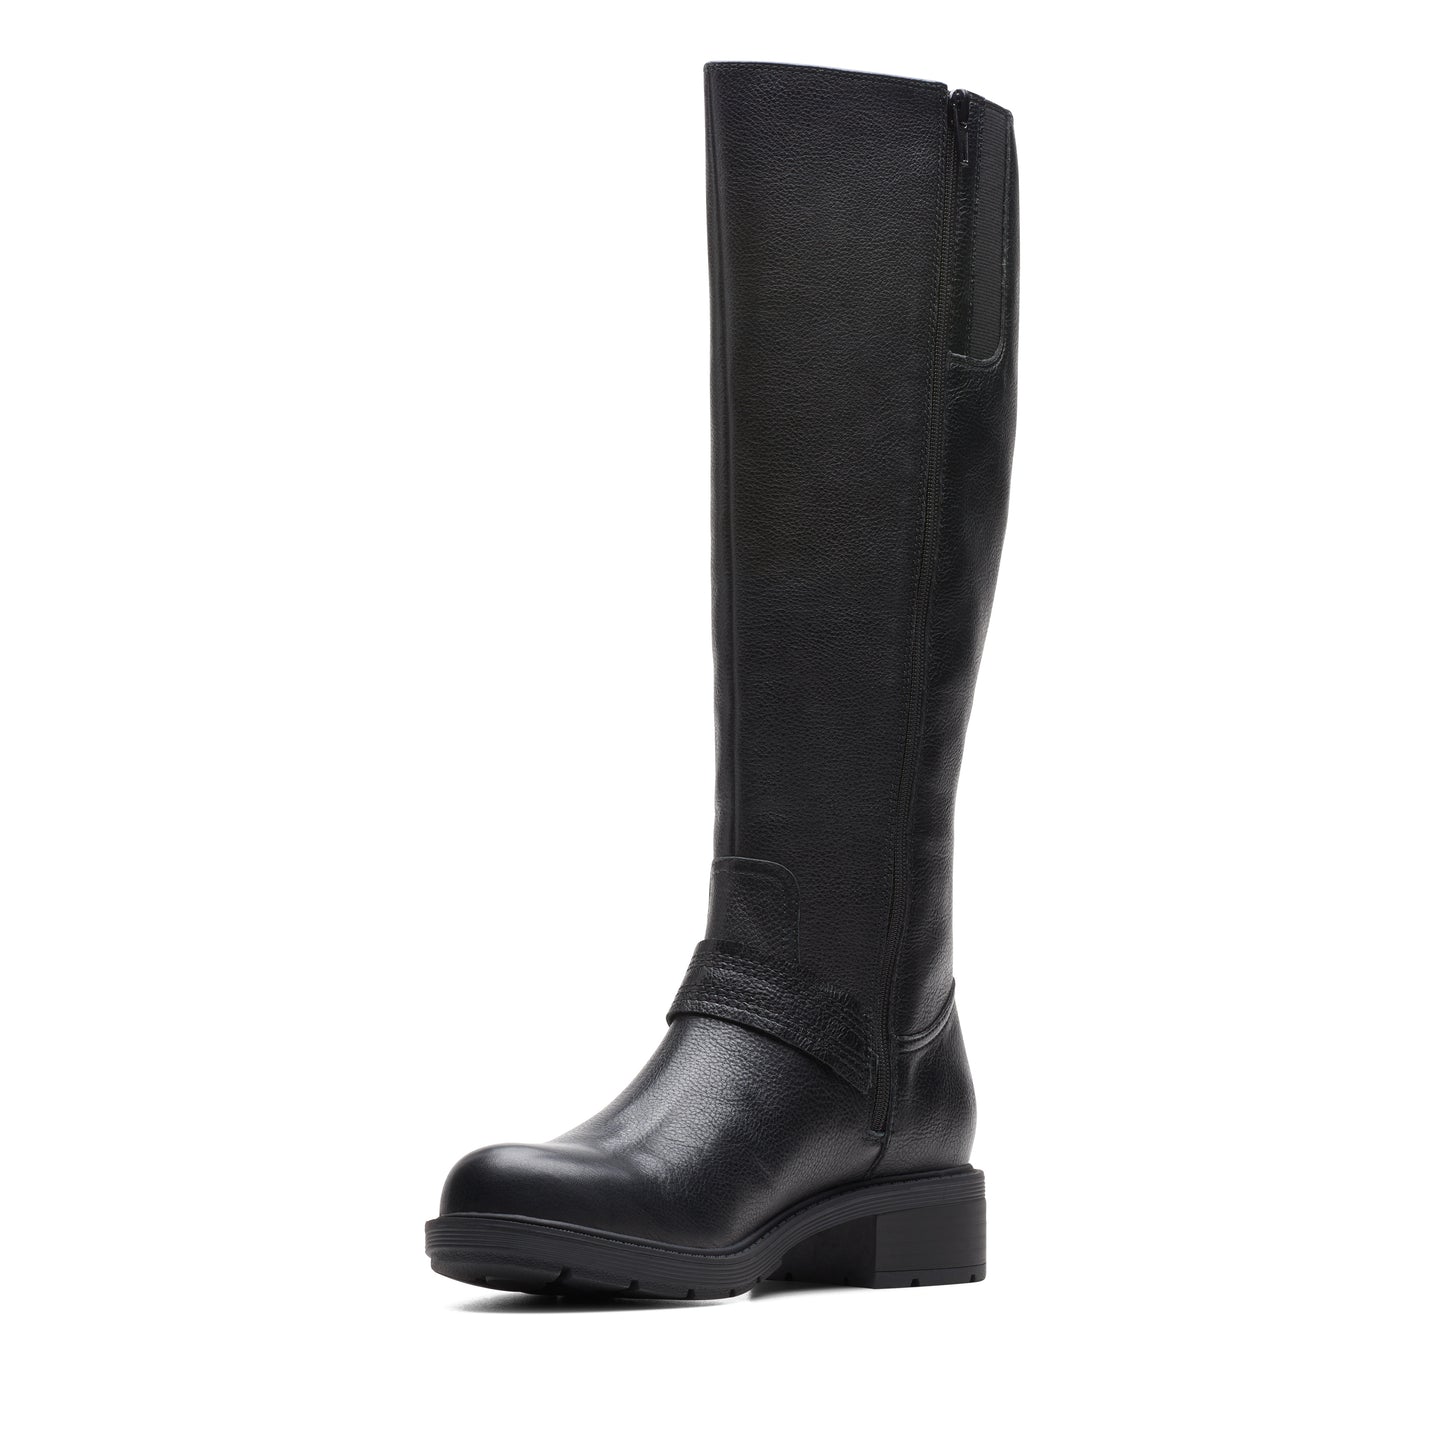 Clarks Women's Hearth Rae Boot - Black Leather